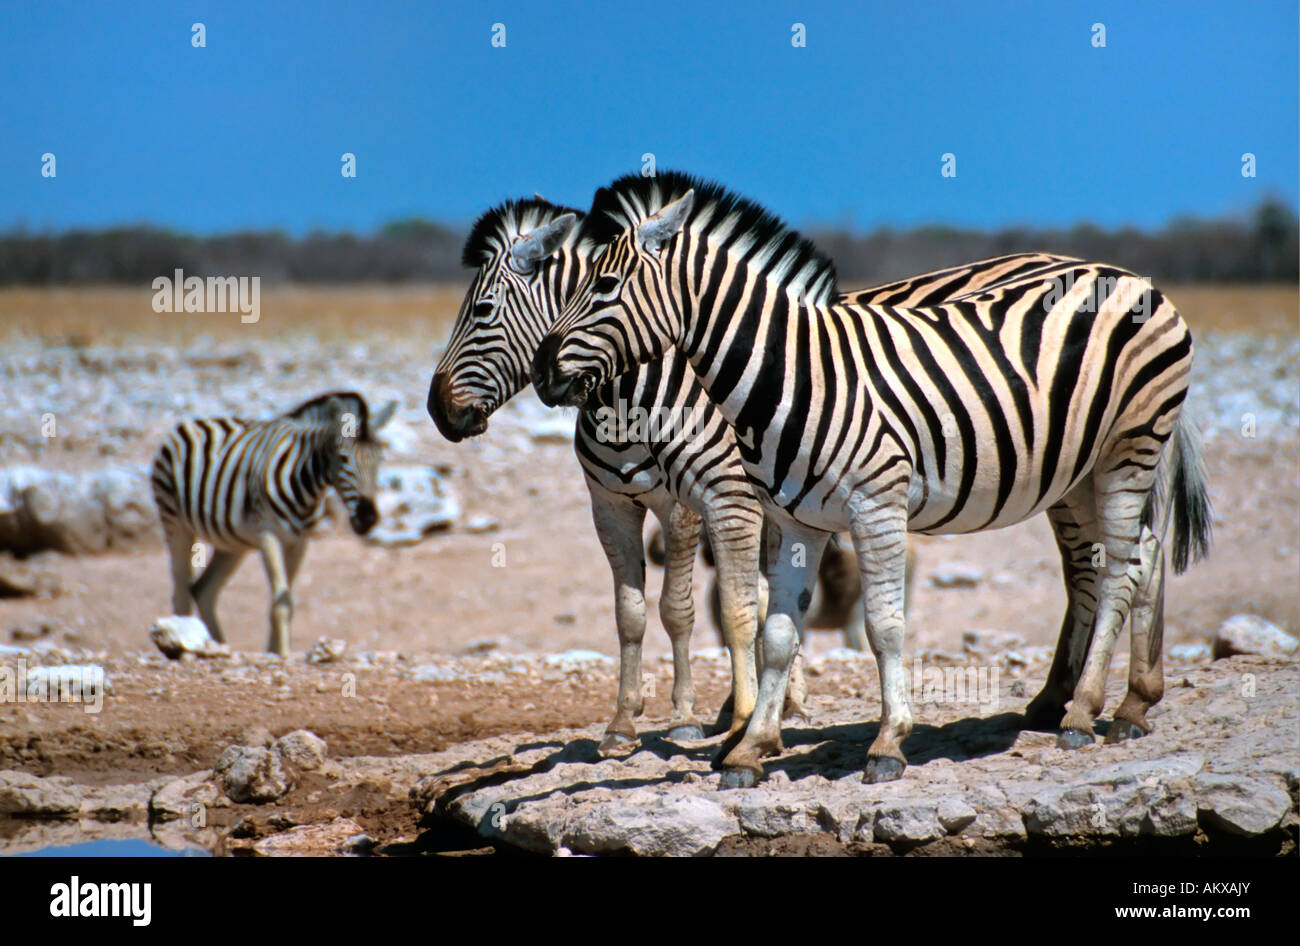 Zebras (Equus quagga) standing at a water hole, Etoscha National Park, Namibia, Africa Stock Photo